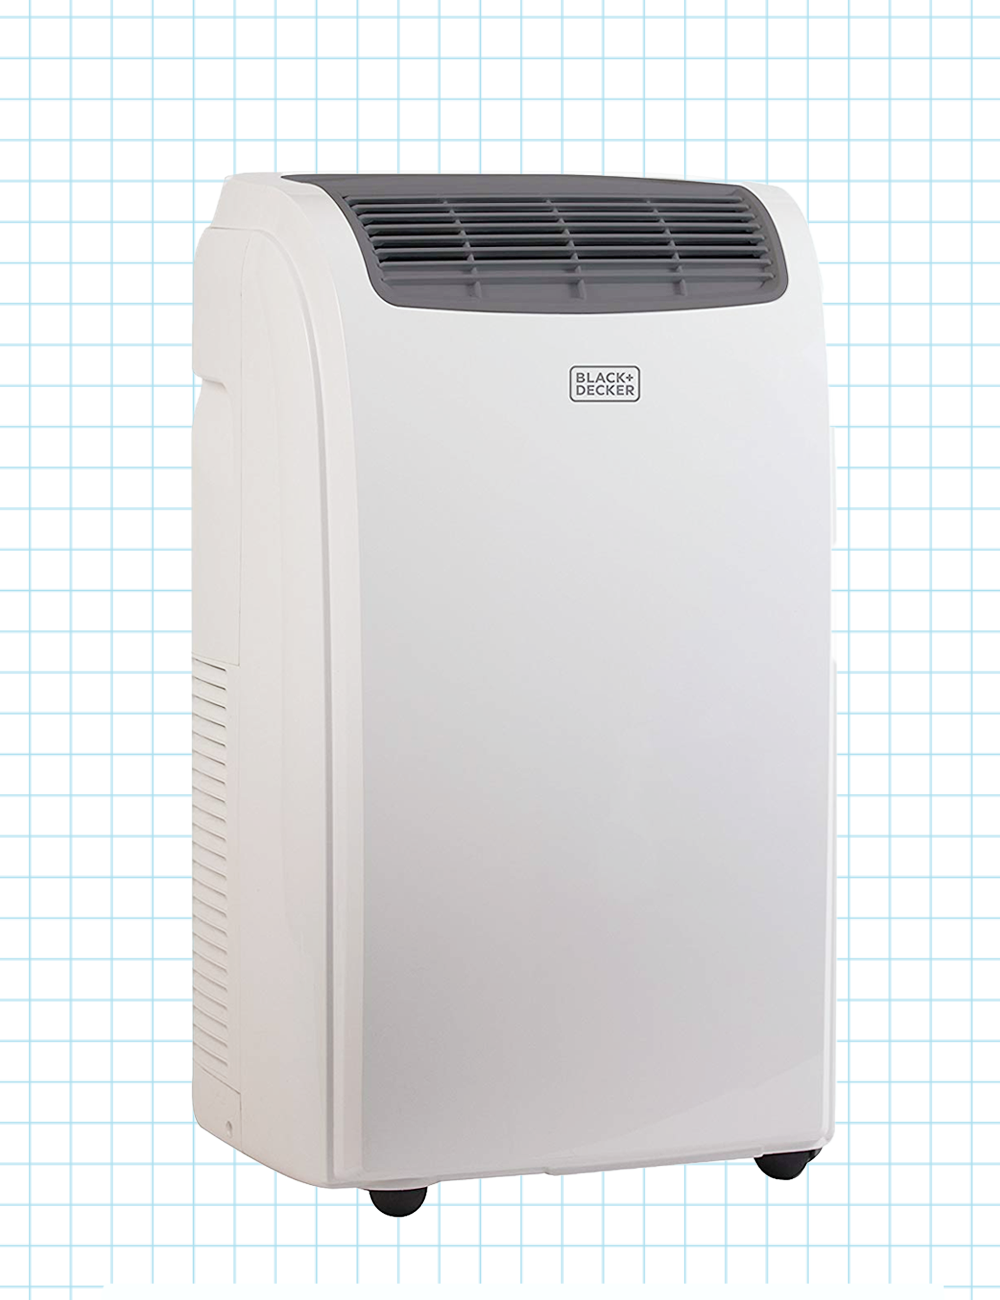 Bpact08wt Portable Air Conditioner